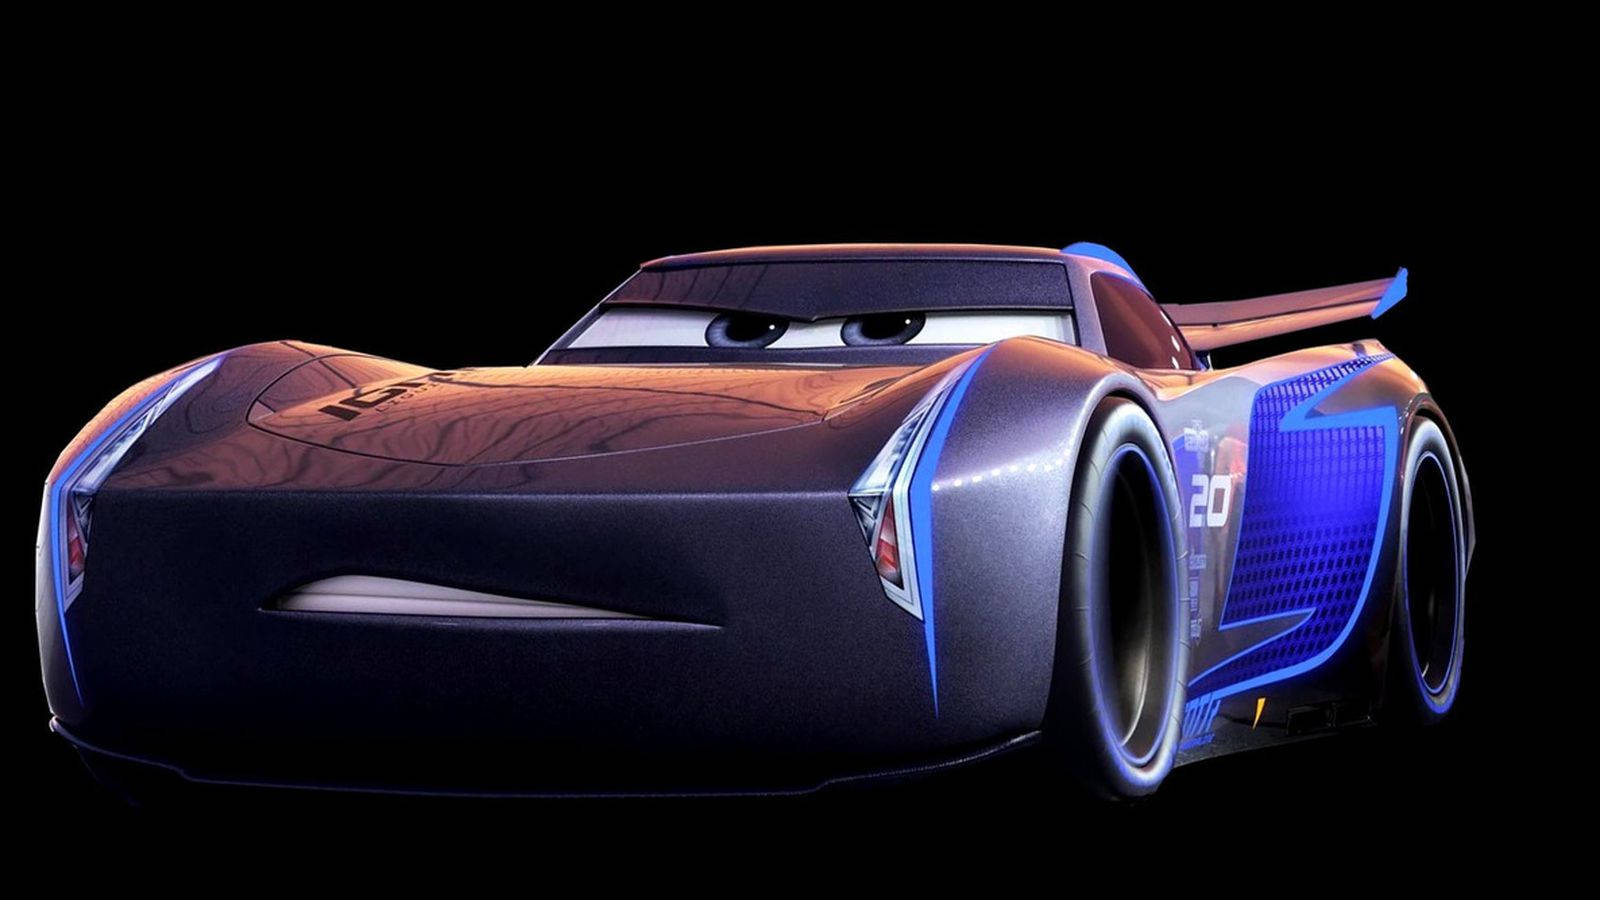 Wallpaper car, Disney, Cars, blue, race, speed, animated film, animated  movie, Cars 3, Jackson Storm images for desktop, section фильмы - download